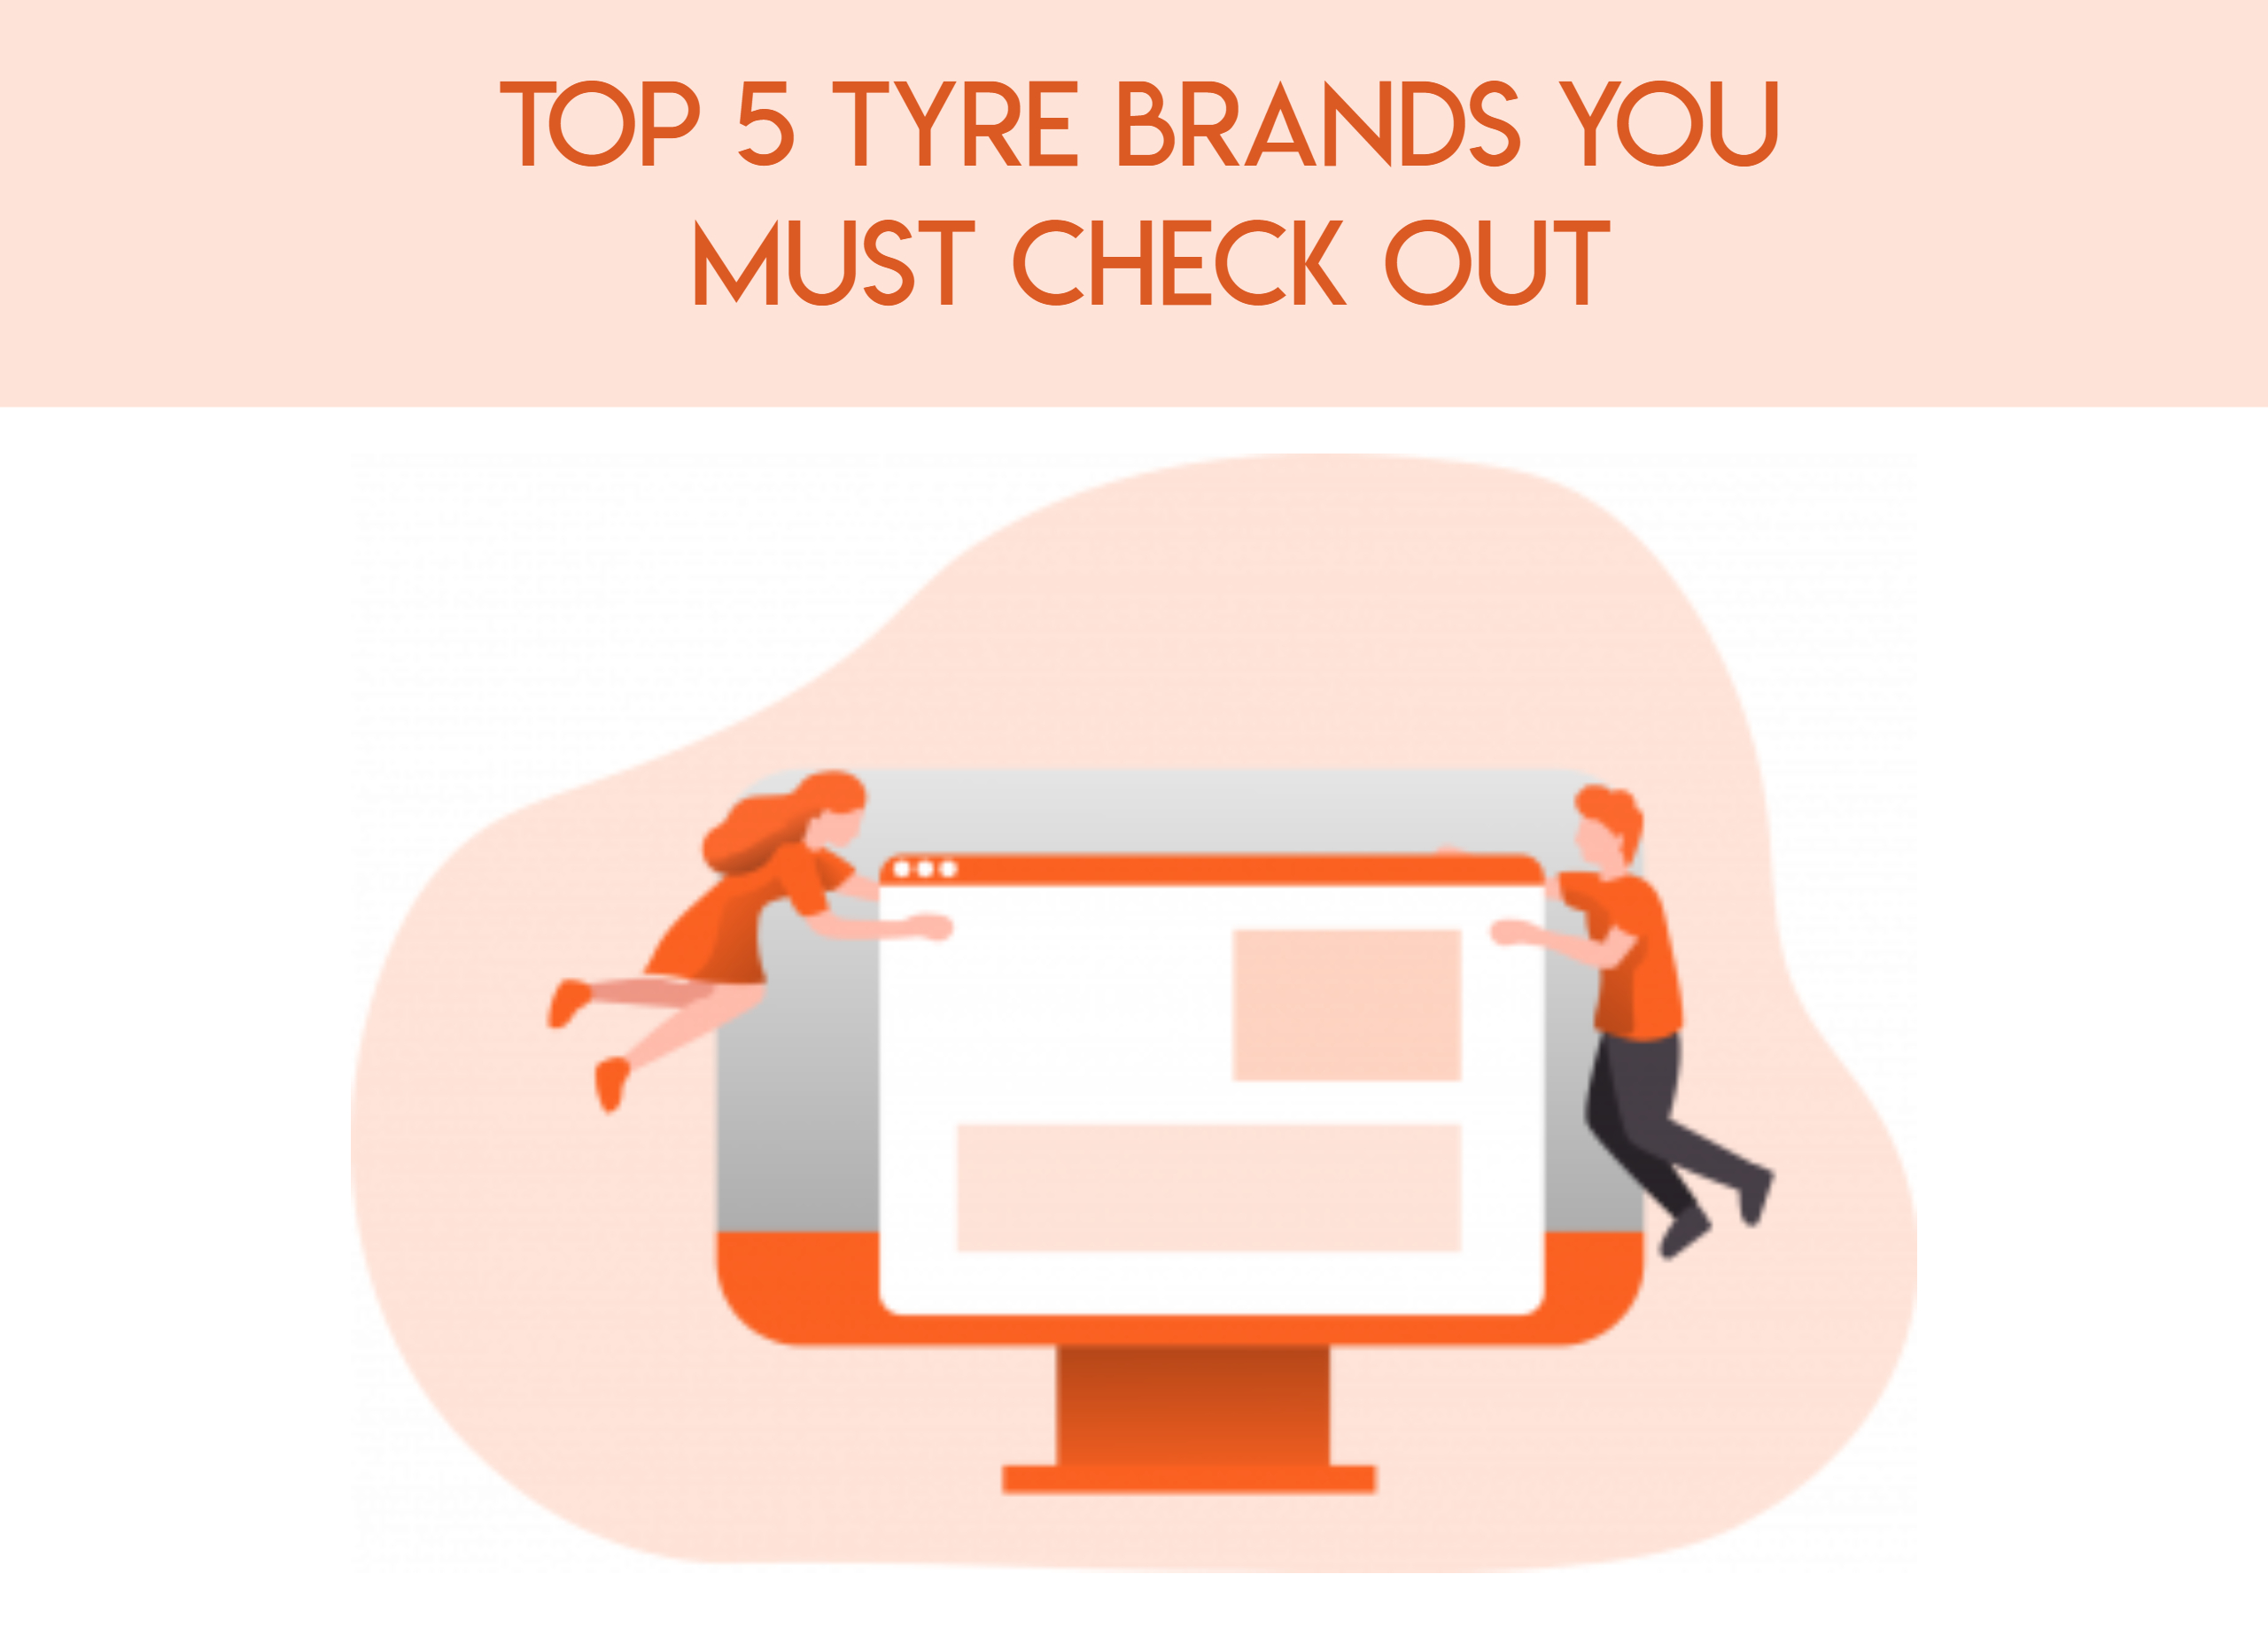 Top 5 Tyre Brands You Must Check Out